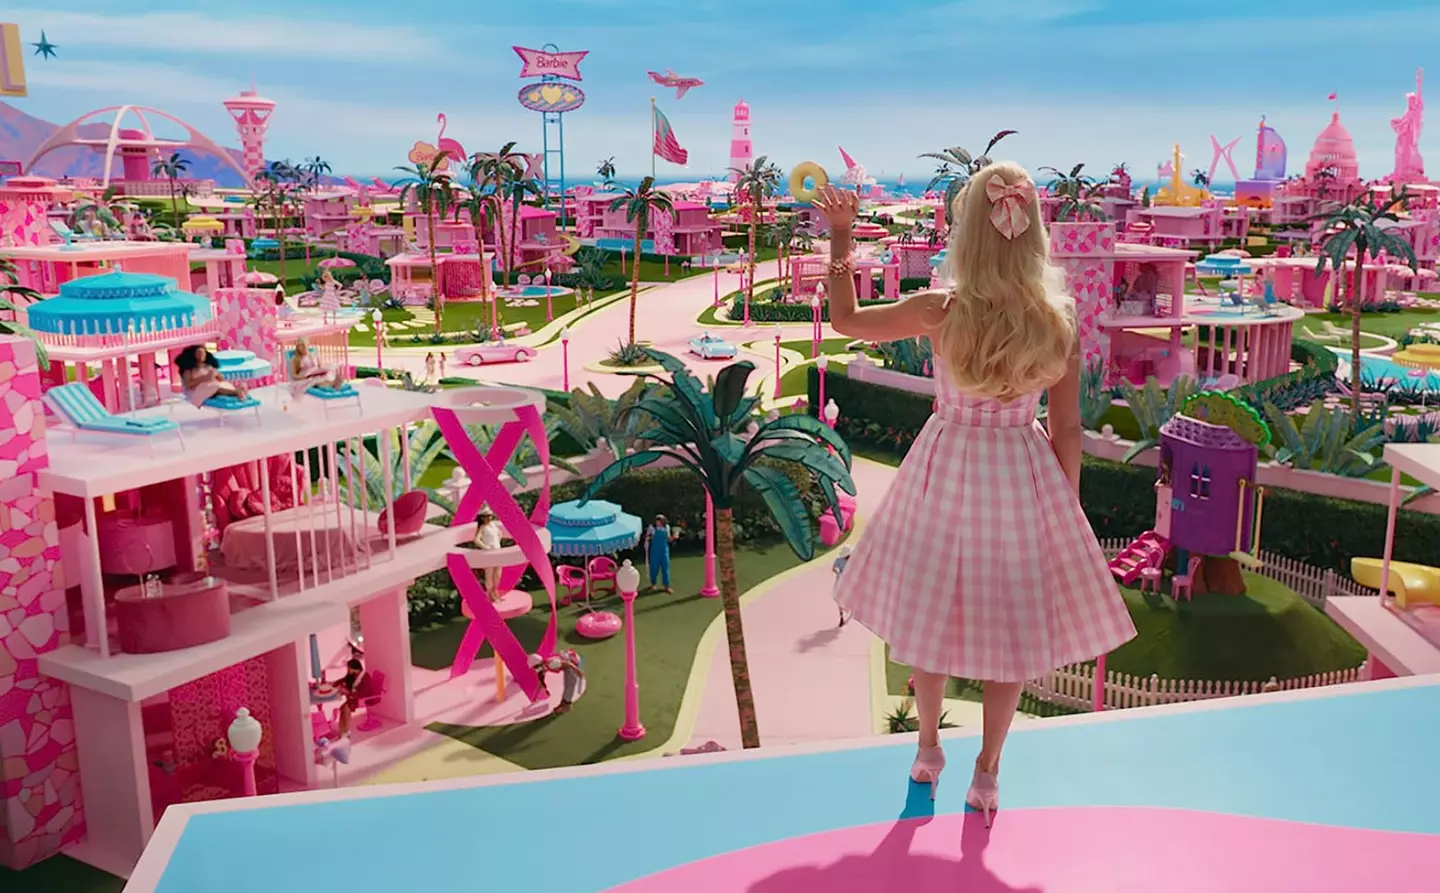 Barbie could easily wave to her friends in Barbie Land.